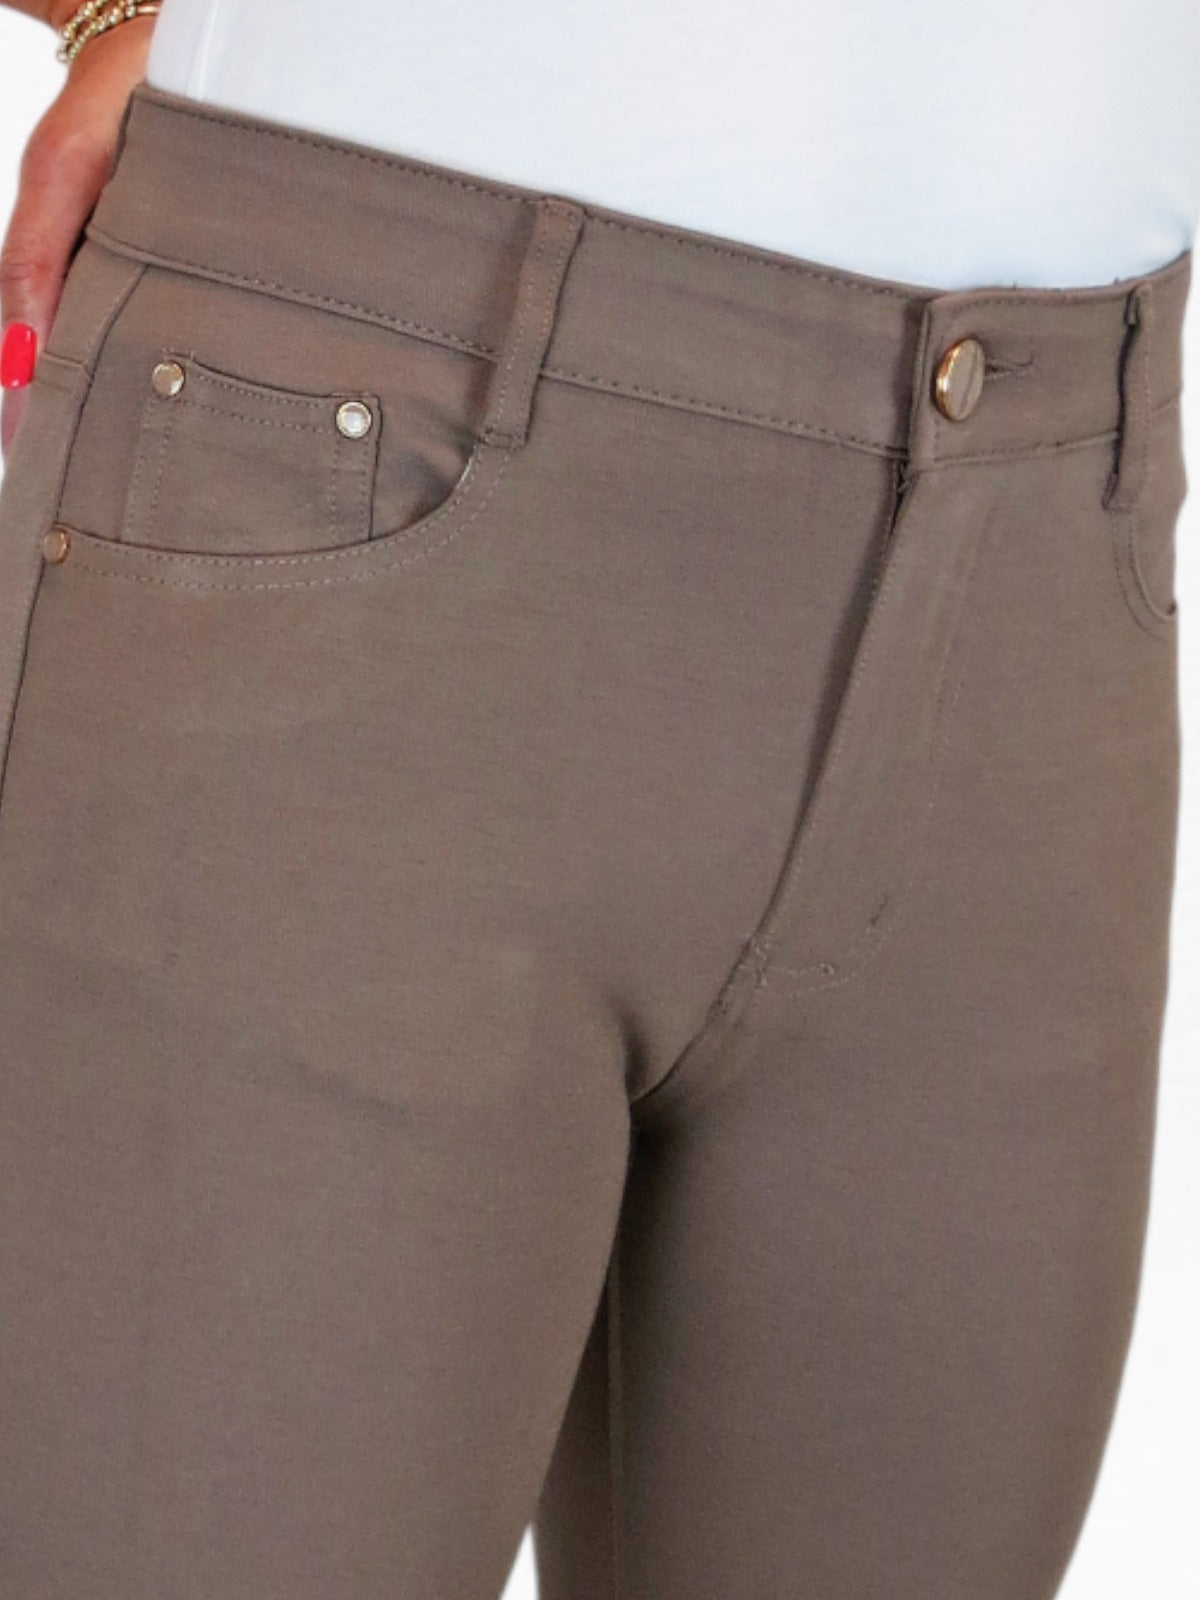 Womens Soft Stretch Ponte Trousers with Pockets Taupe Brown